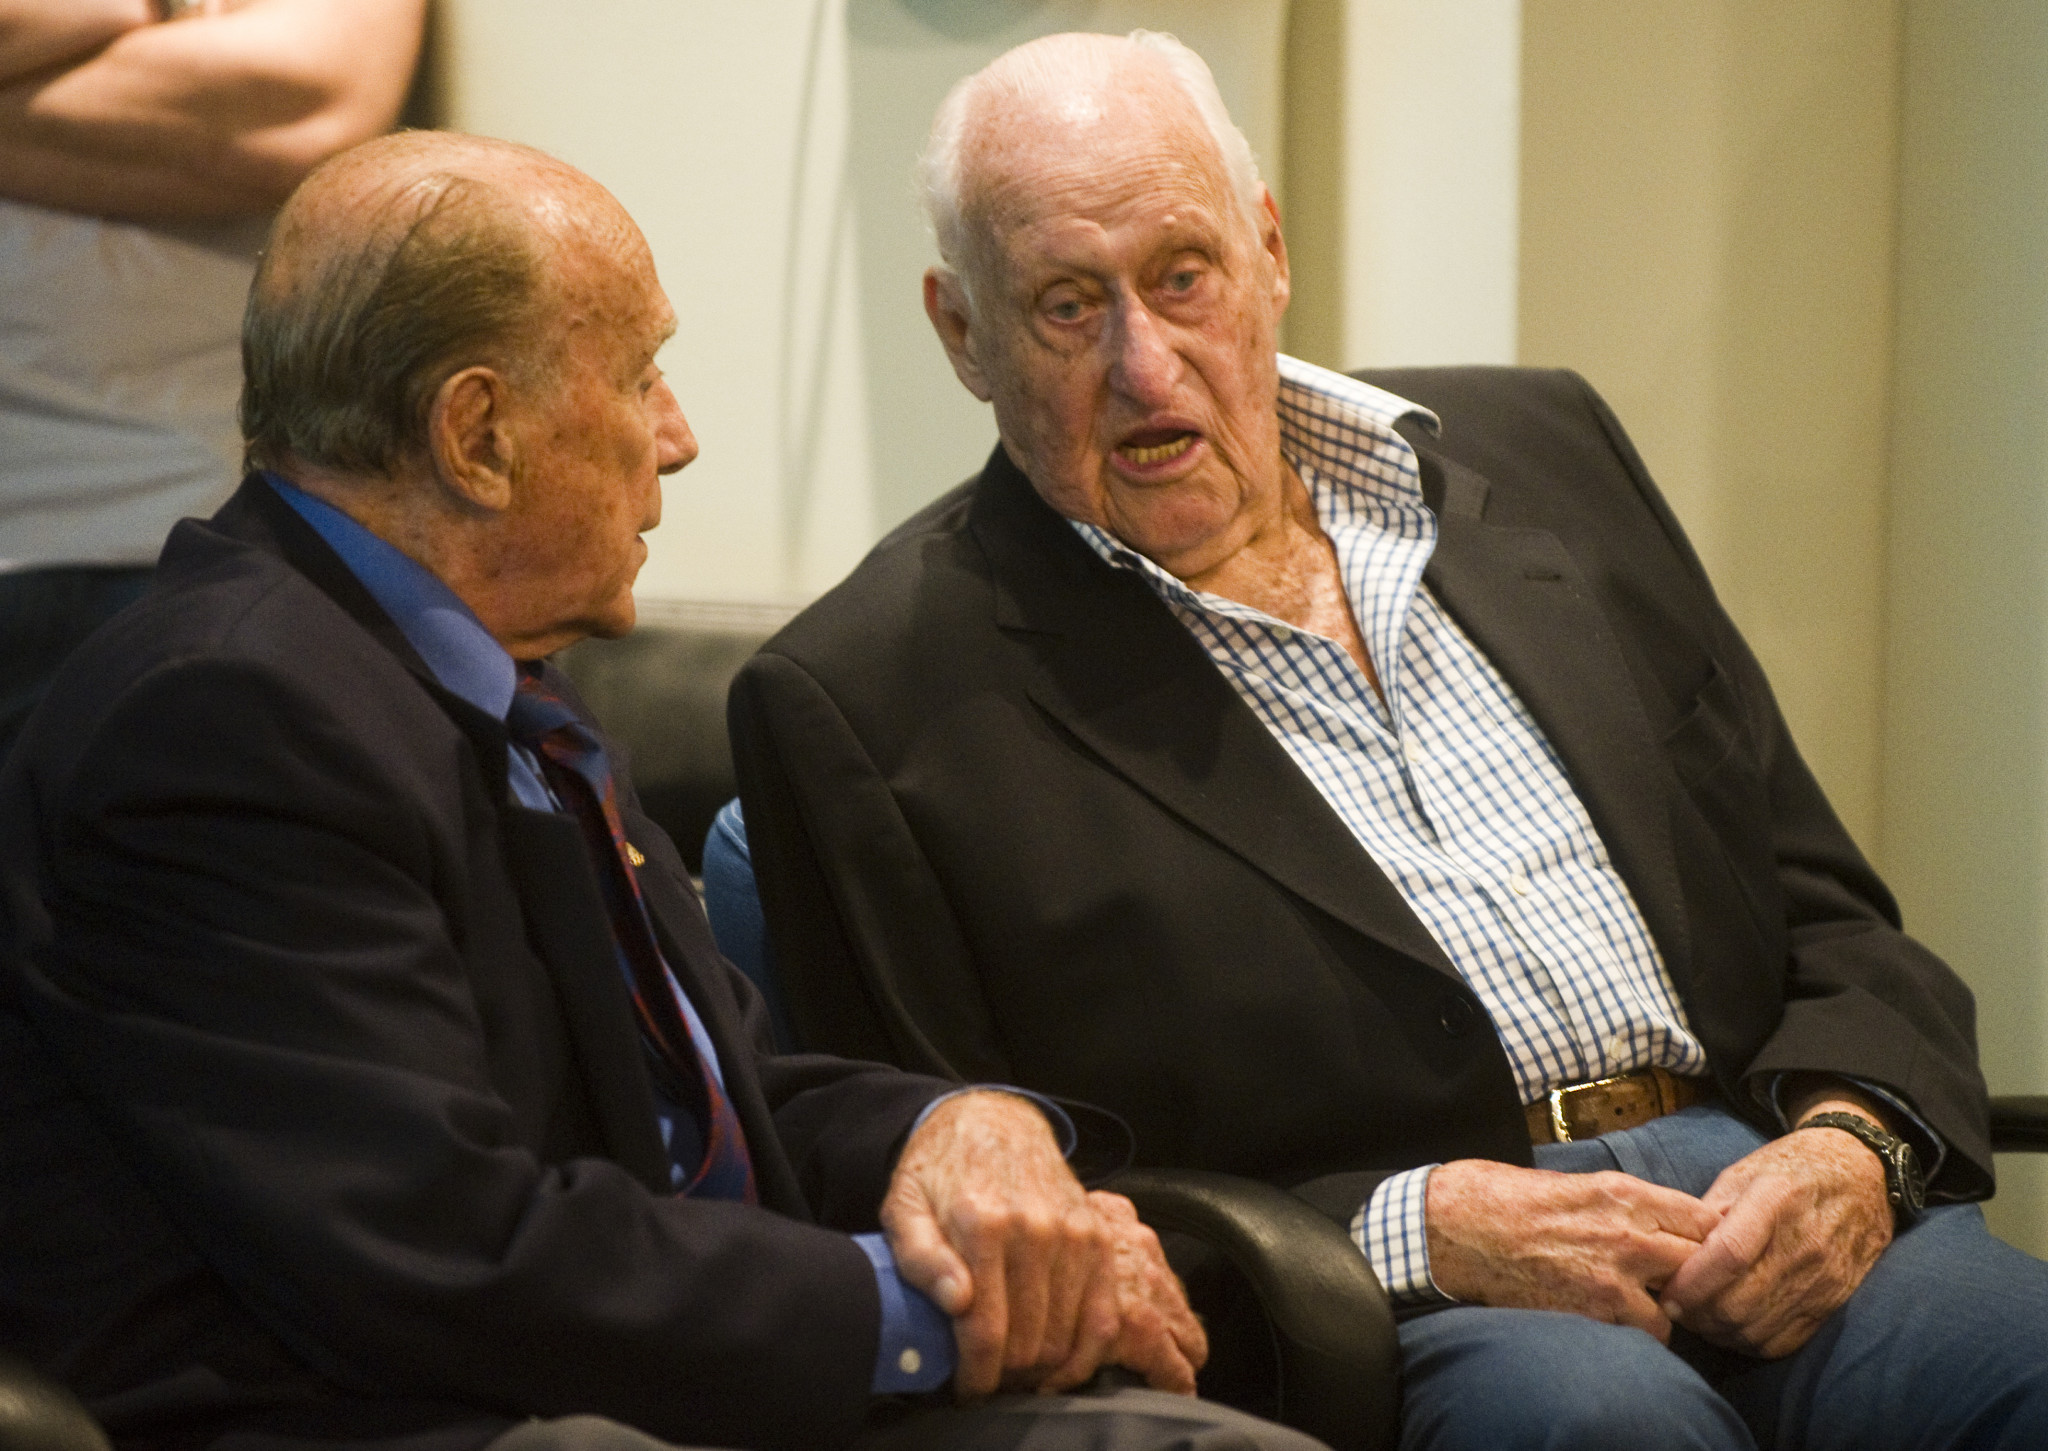 Andre Richer, left, speaks with former FIFA President Joao Havelange in 2012 ©Getty Images